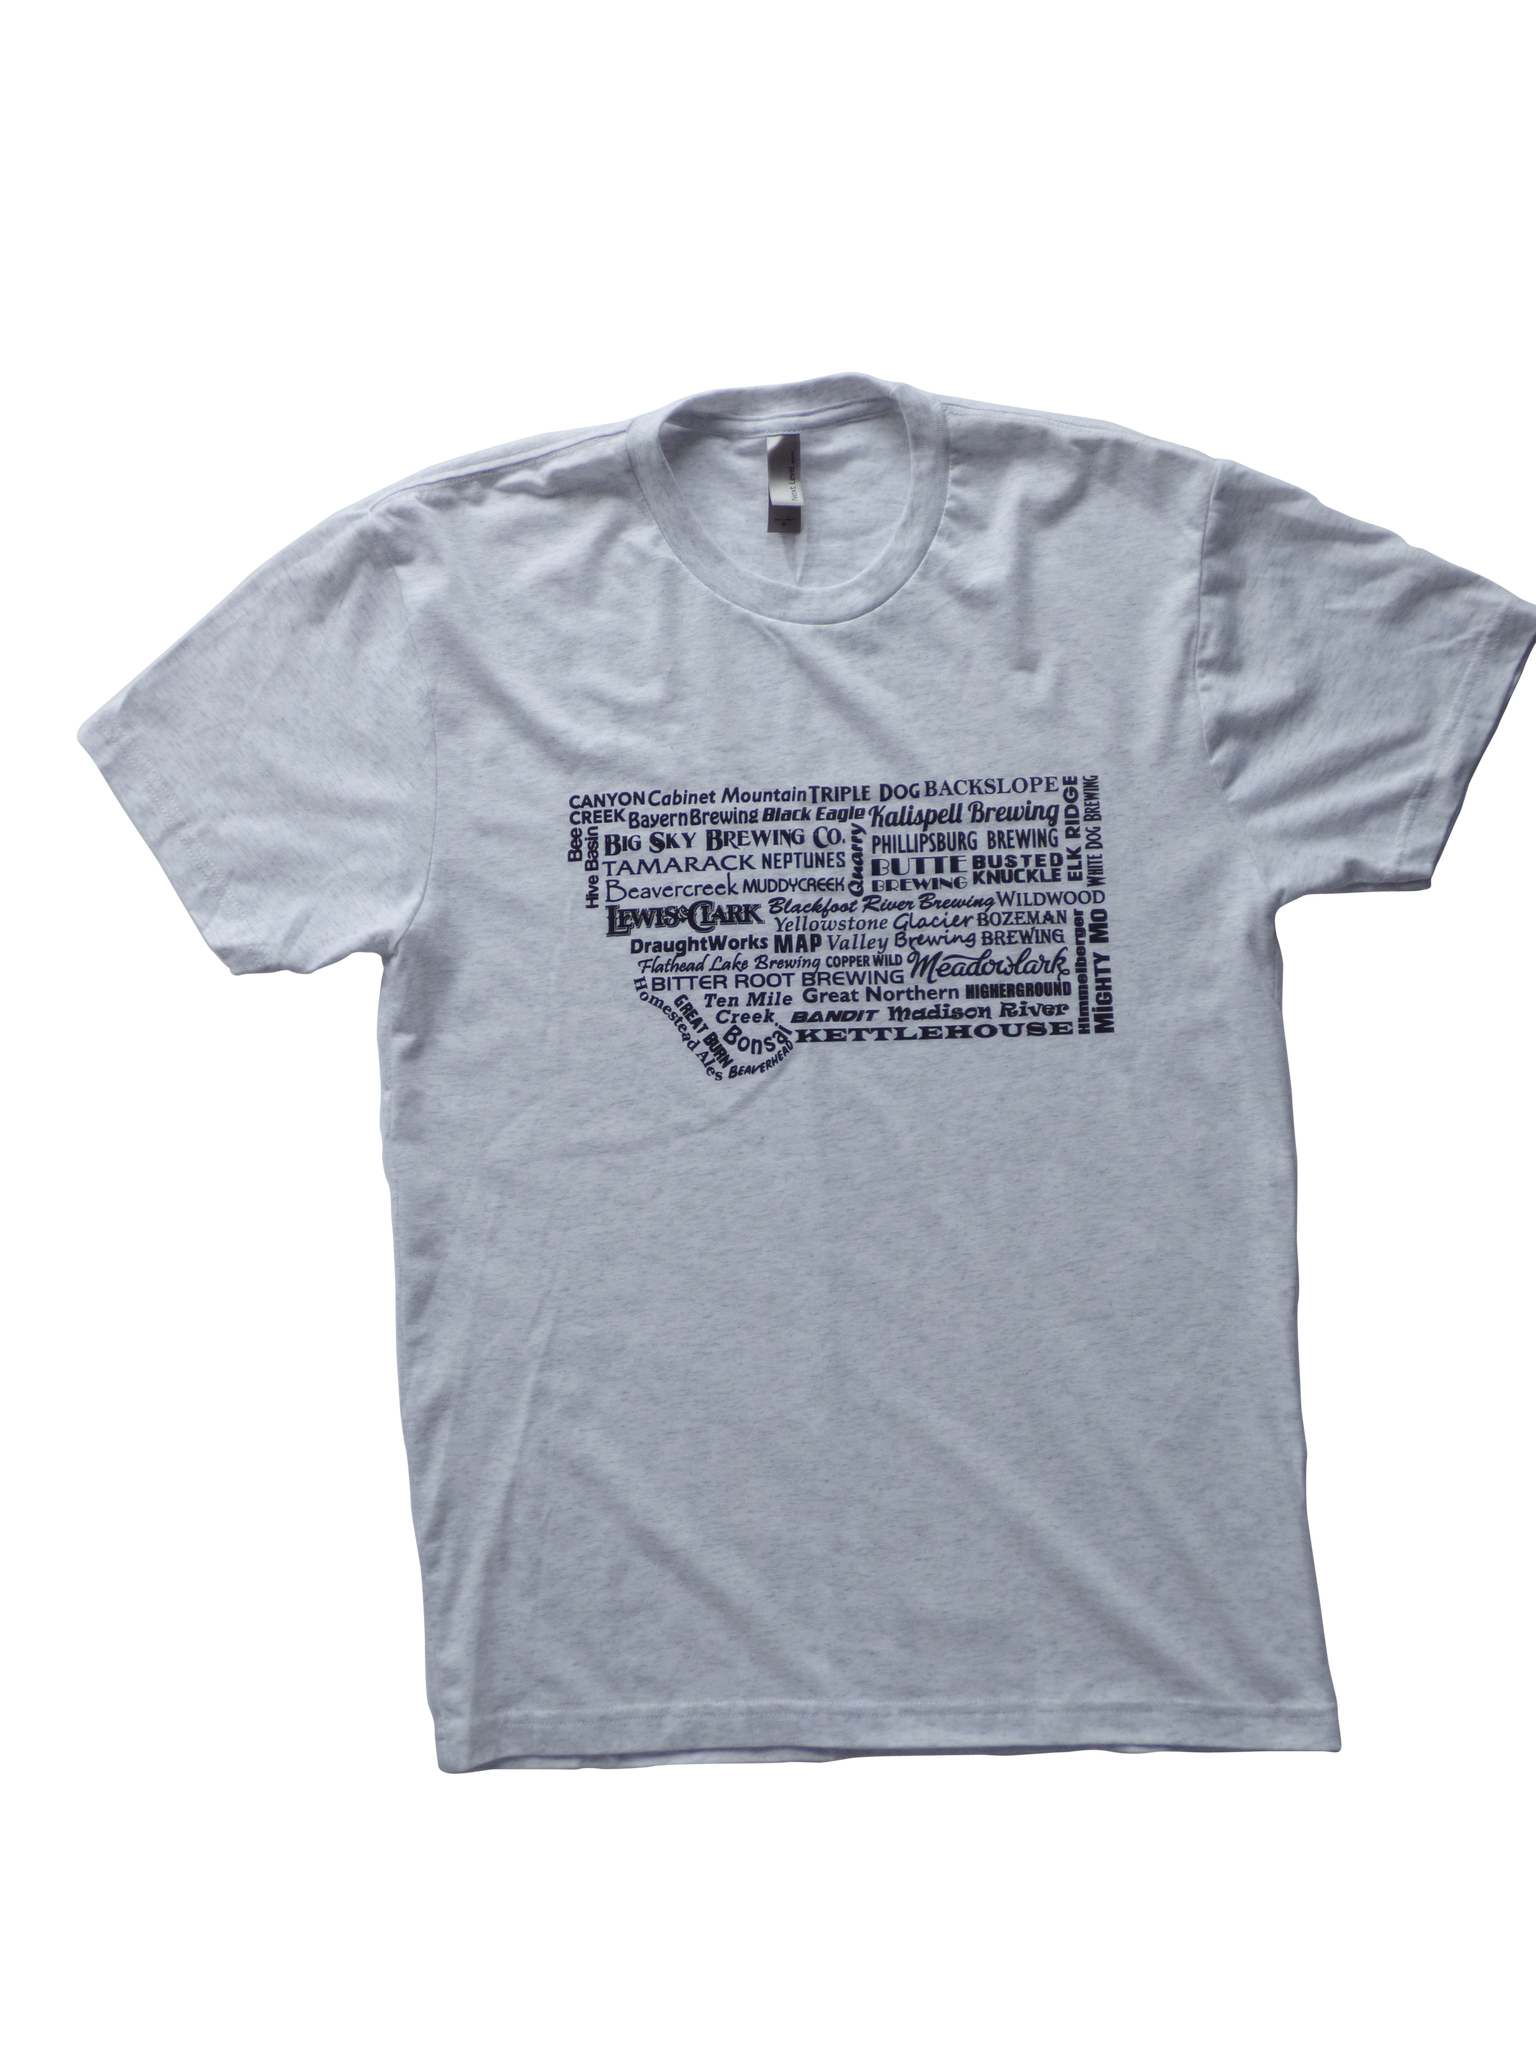 CLEARANCE Men's Heathered White Brewery Shirt